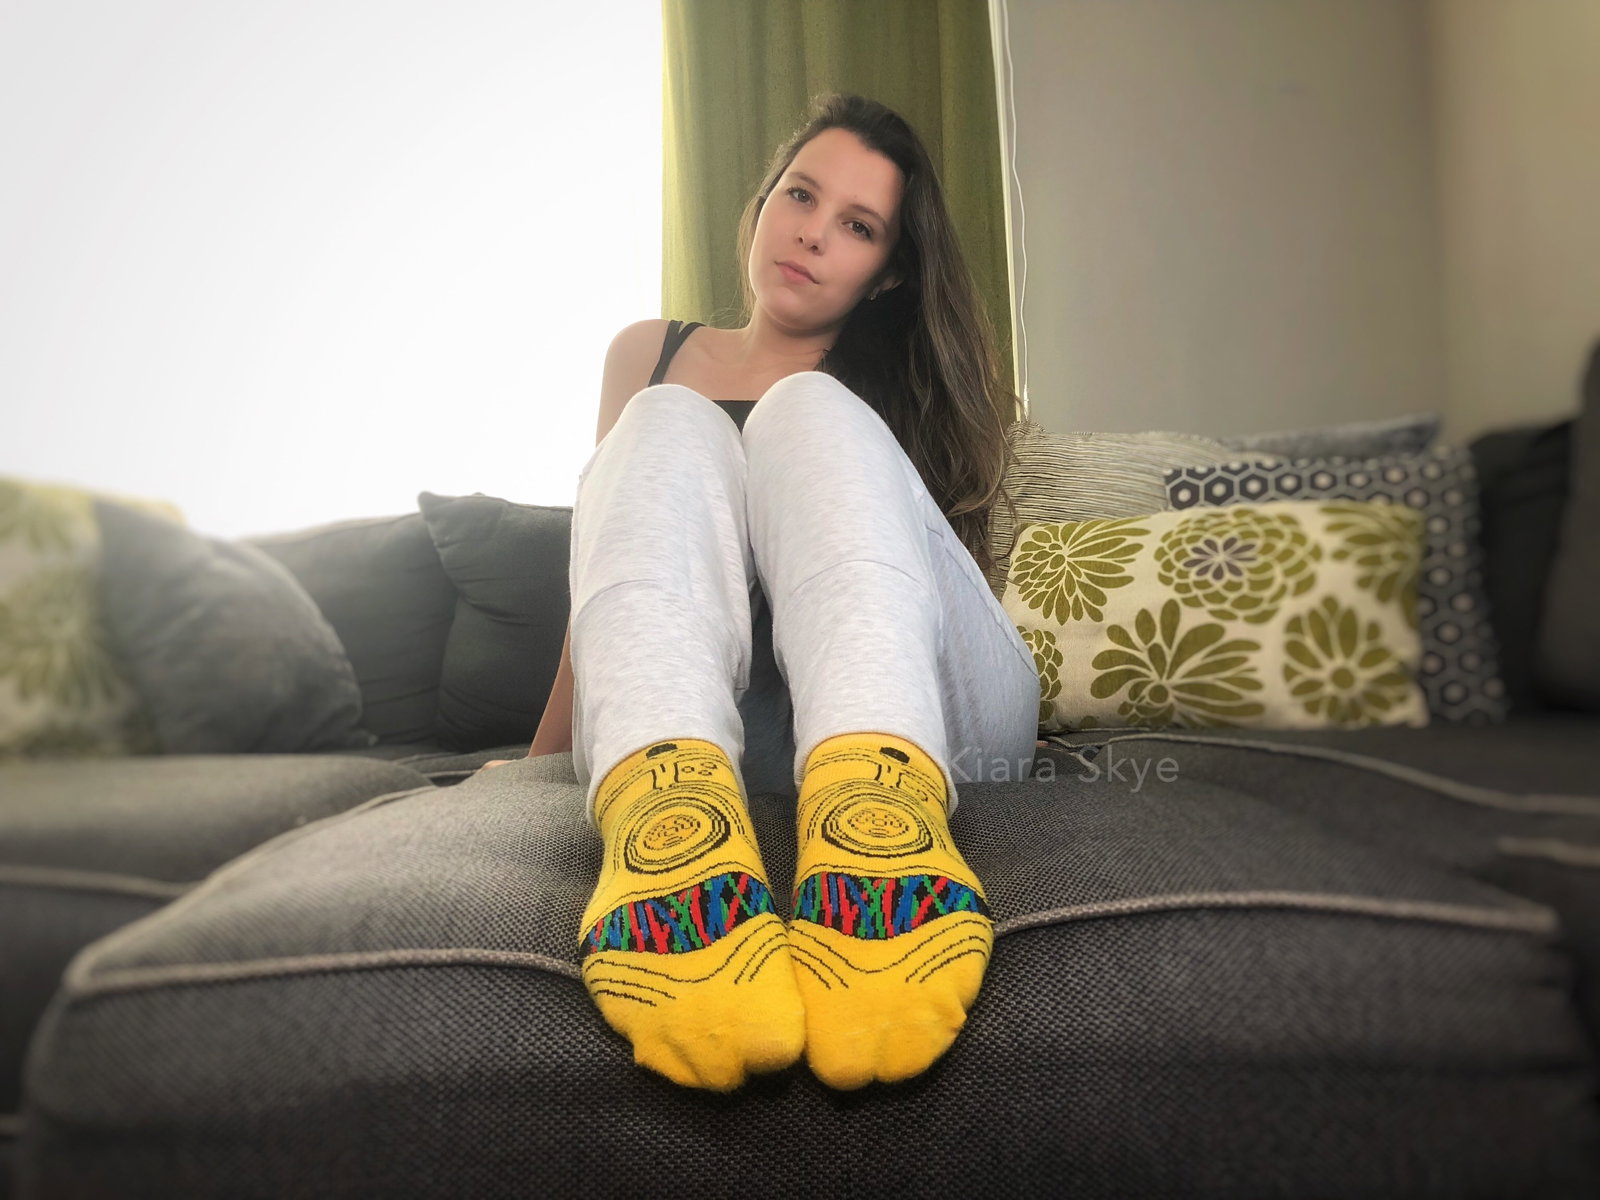 Watch the Photo by Kiara Skye with the username @KiaraSkye, who is a star user, posted on May 4, 2020. The post is about the topic Hot Girls in Socks. and the text says '🎬 Happy Star Wars Day nerds! 🦶 

🧦https://onlyfans.com/kiaraskye

🌑(Mega 60+ set of me with these C3PO socks is going on my fan site! PLUS a special guest later!) 

#starwars #c3pO #socks #maythe4thbewithyou #brunette #smallfeet #smellysocks..'